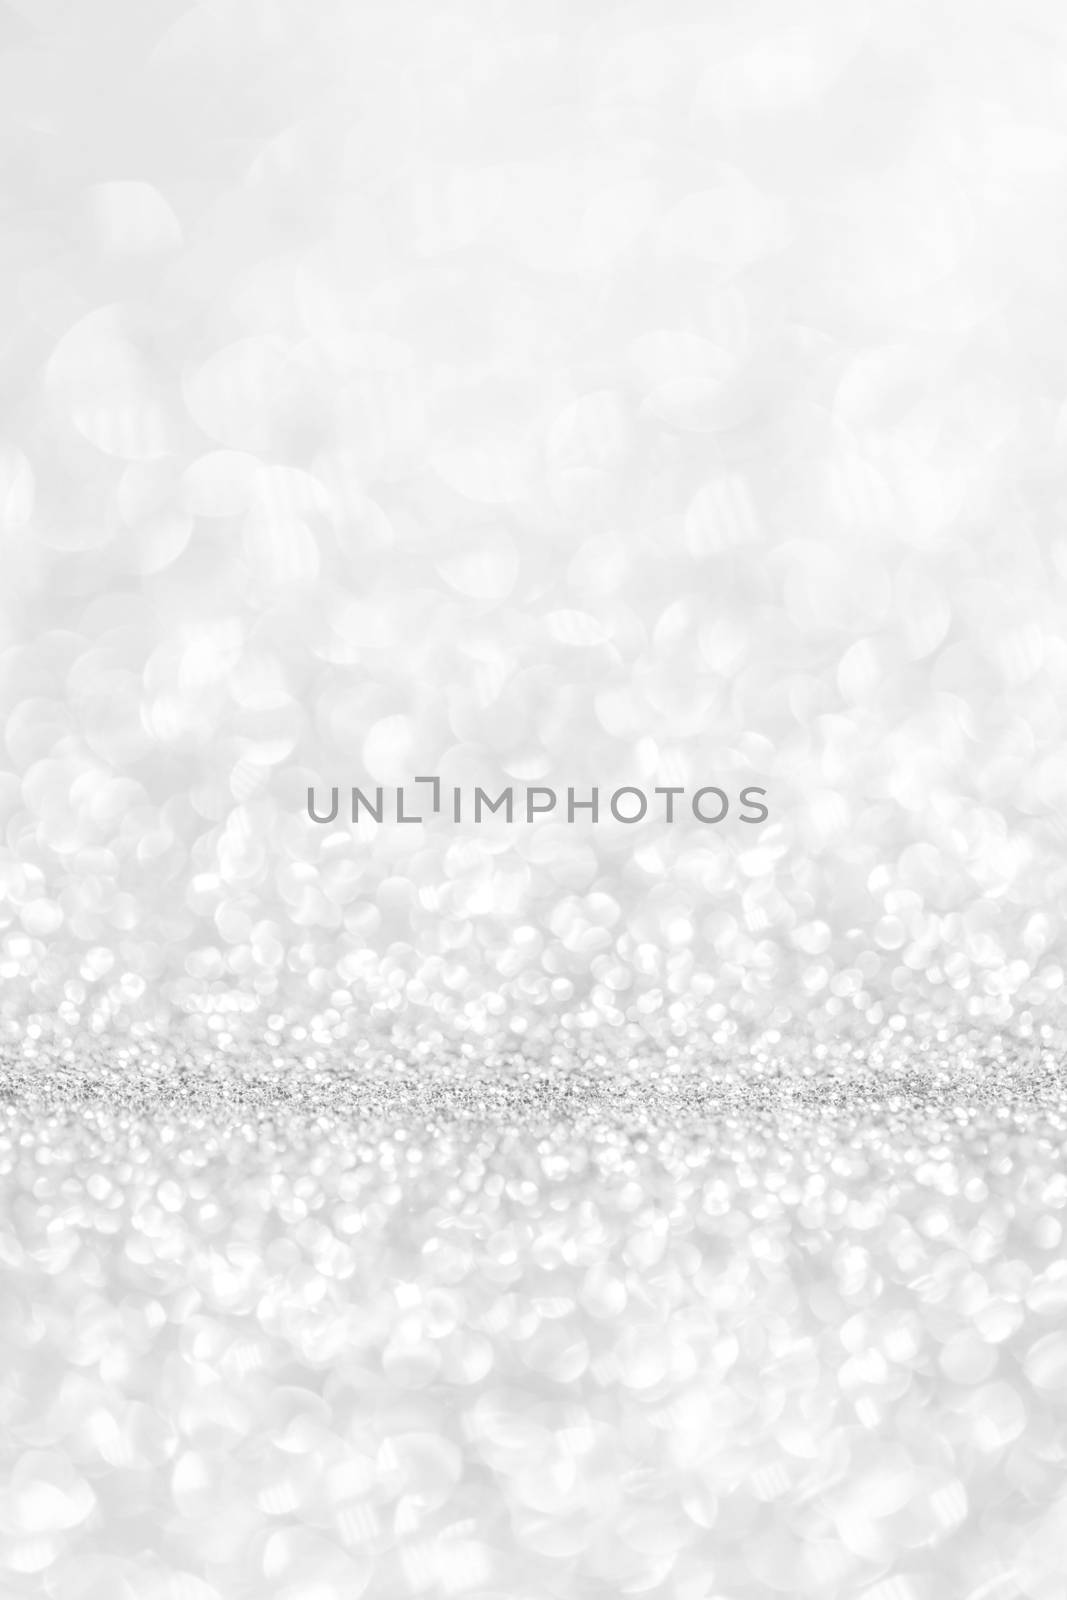 Abstract shining glitters silver holiday bokeh background with copy space for text